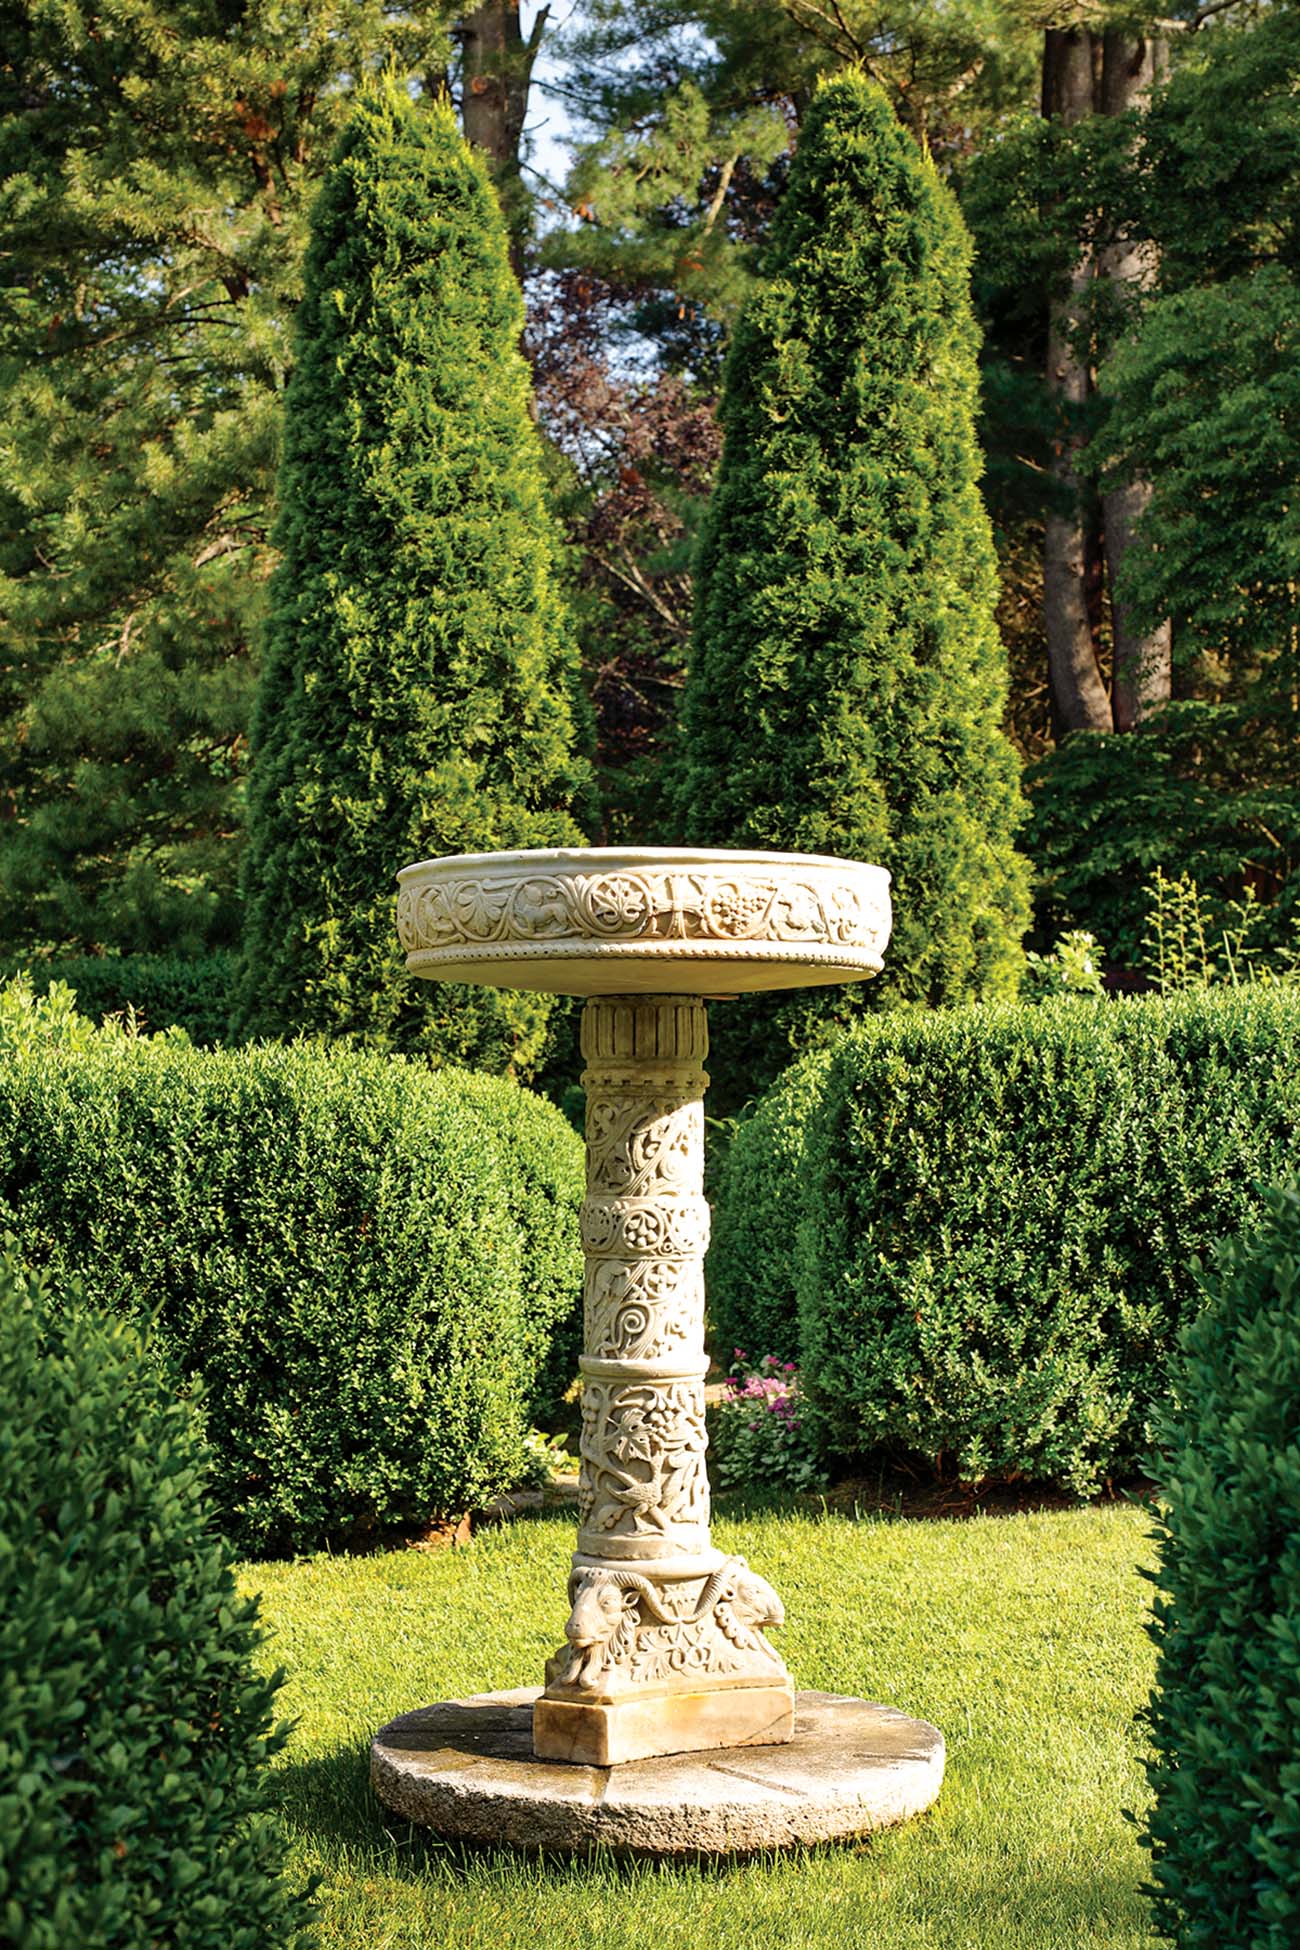 A stone basin sits in a garden next to manicured hedges.